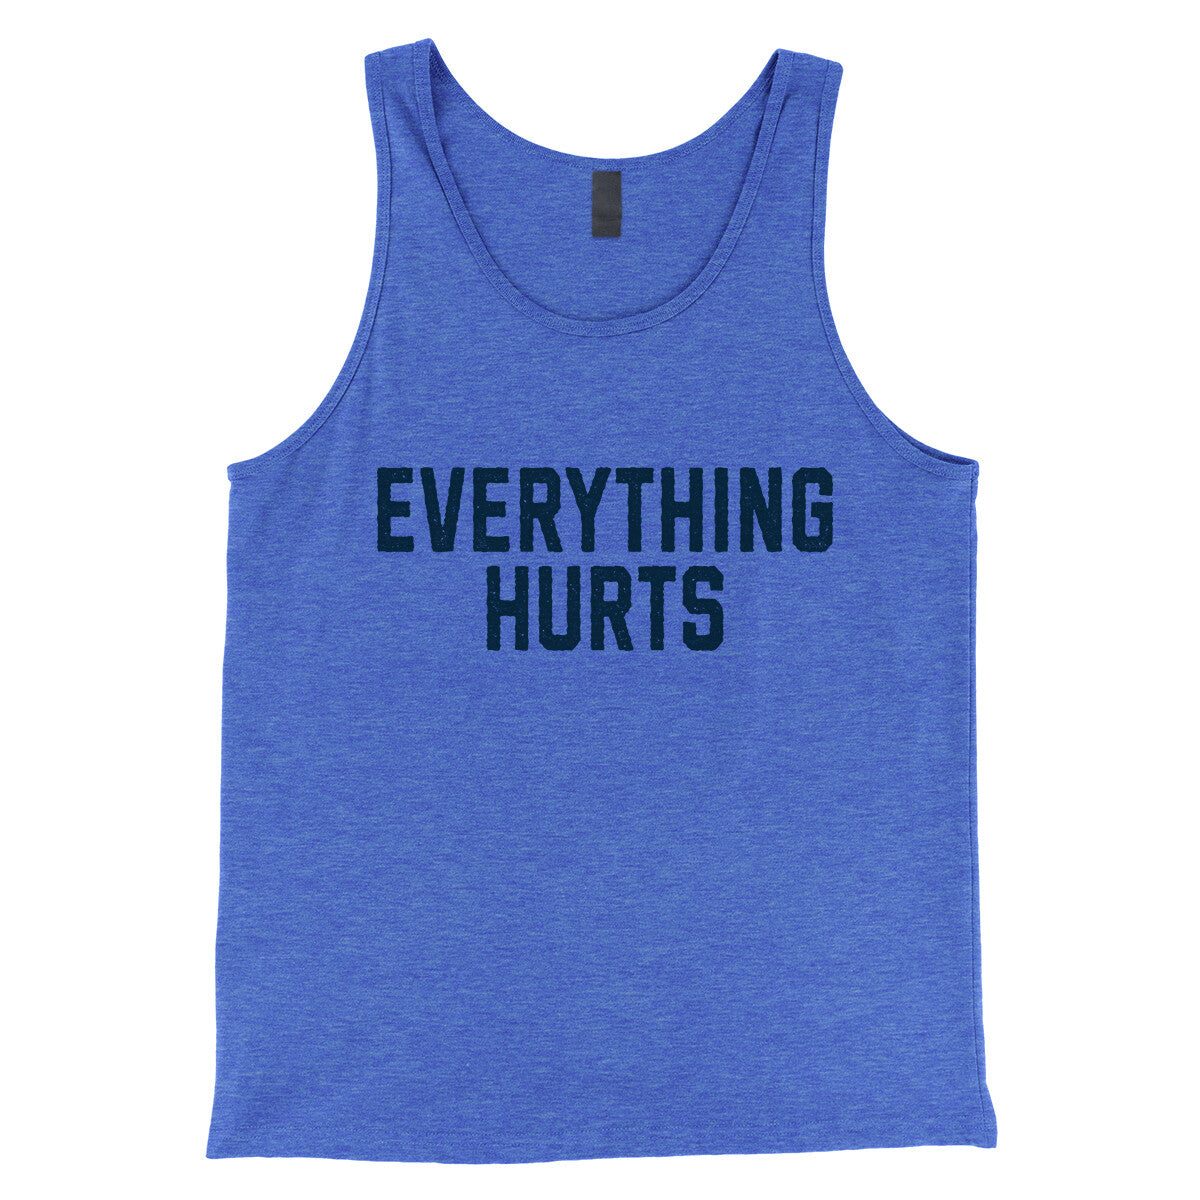 Everything Hurts in True Royal TriBlend Color